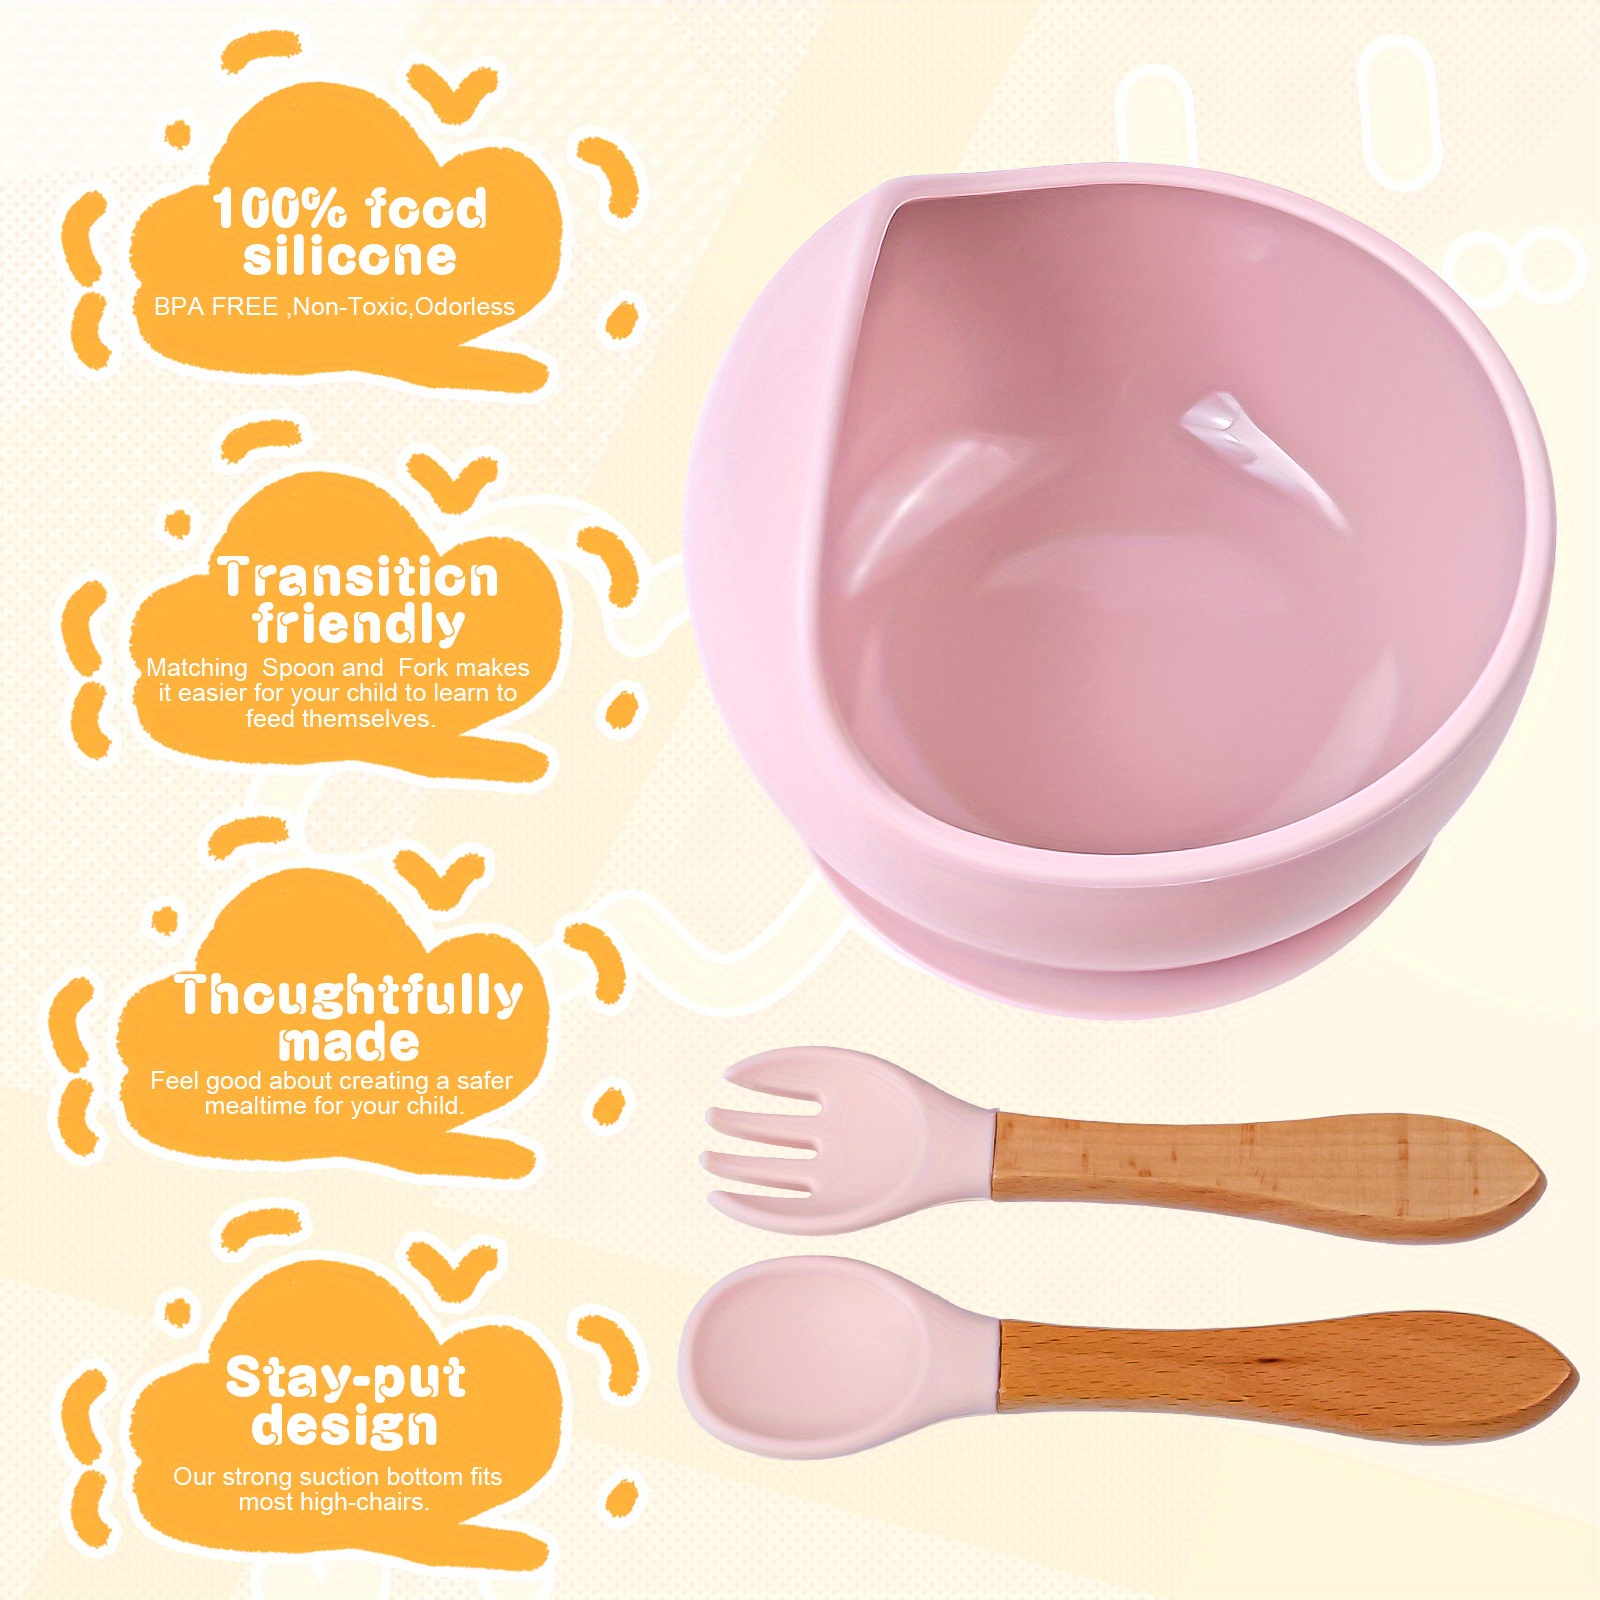 How to Choose the Best Utensils and Bowls for Your Baby